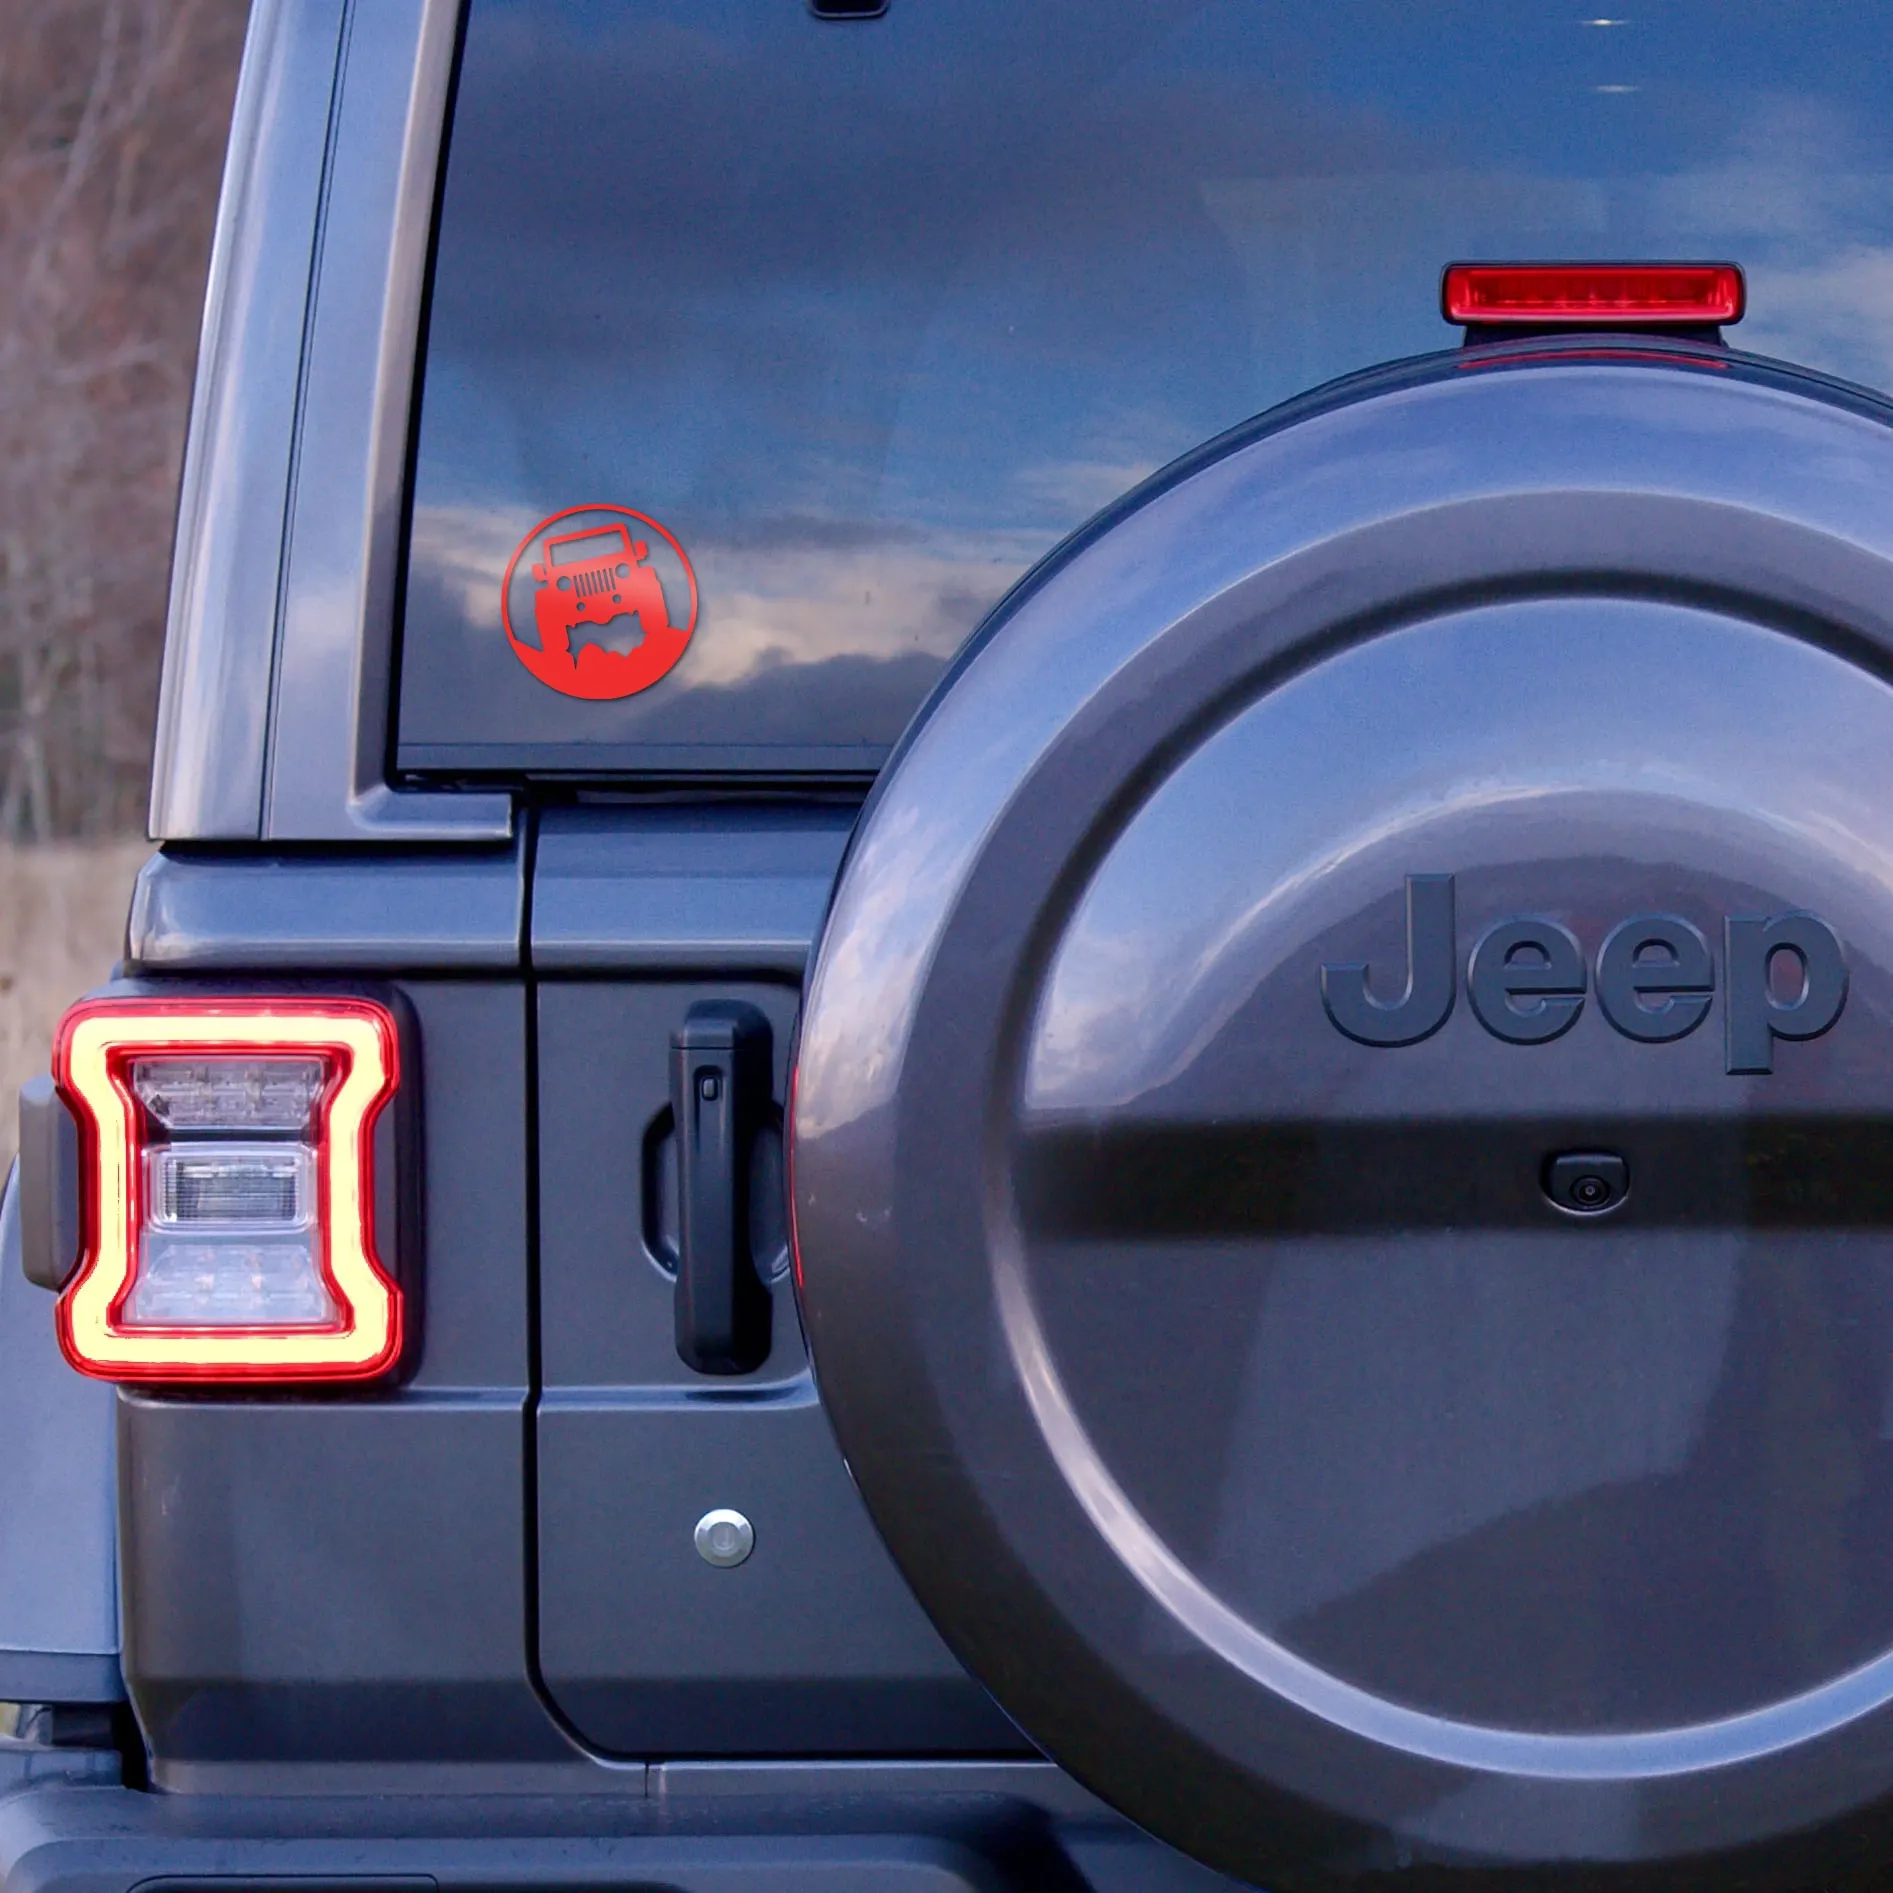 Visco Jeep Silhouette Circle Graphic, Red